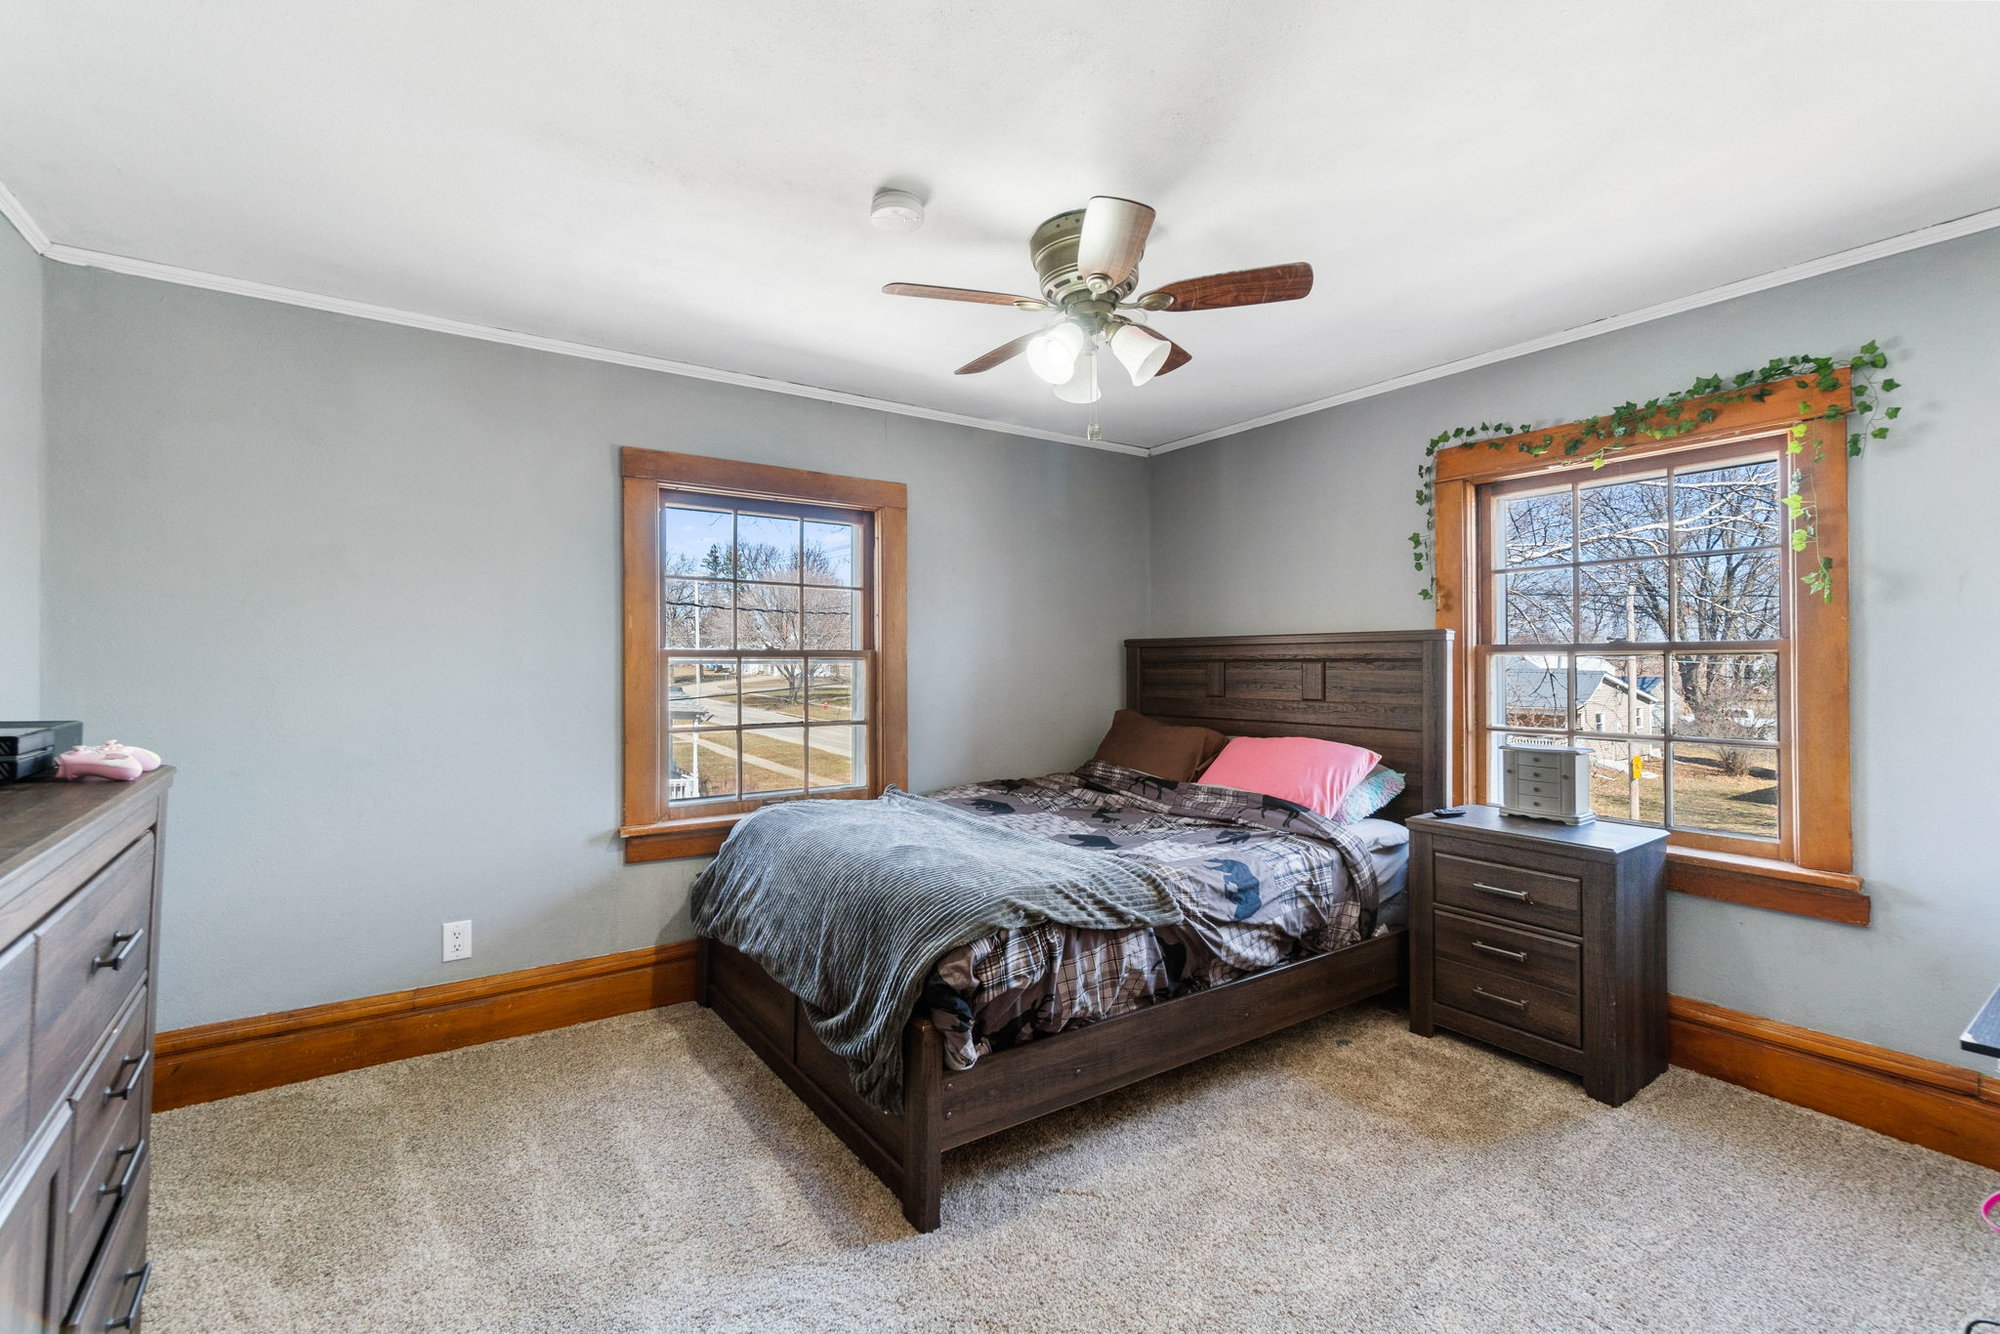 Take a Look at this Beautiful Two-Story Home in Sumner Iowa - 613 Pleasant St., Sumner